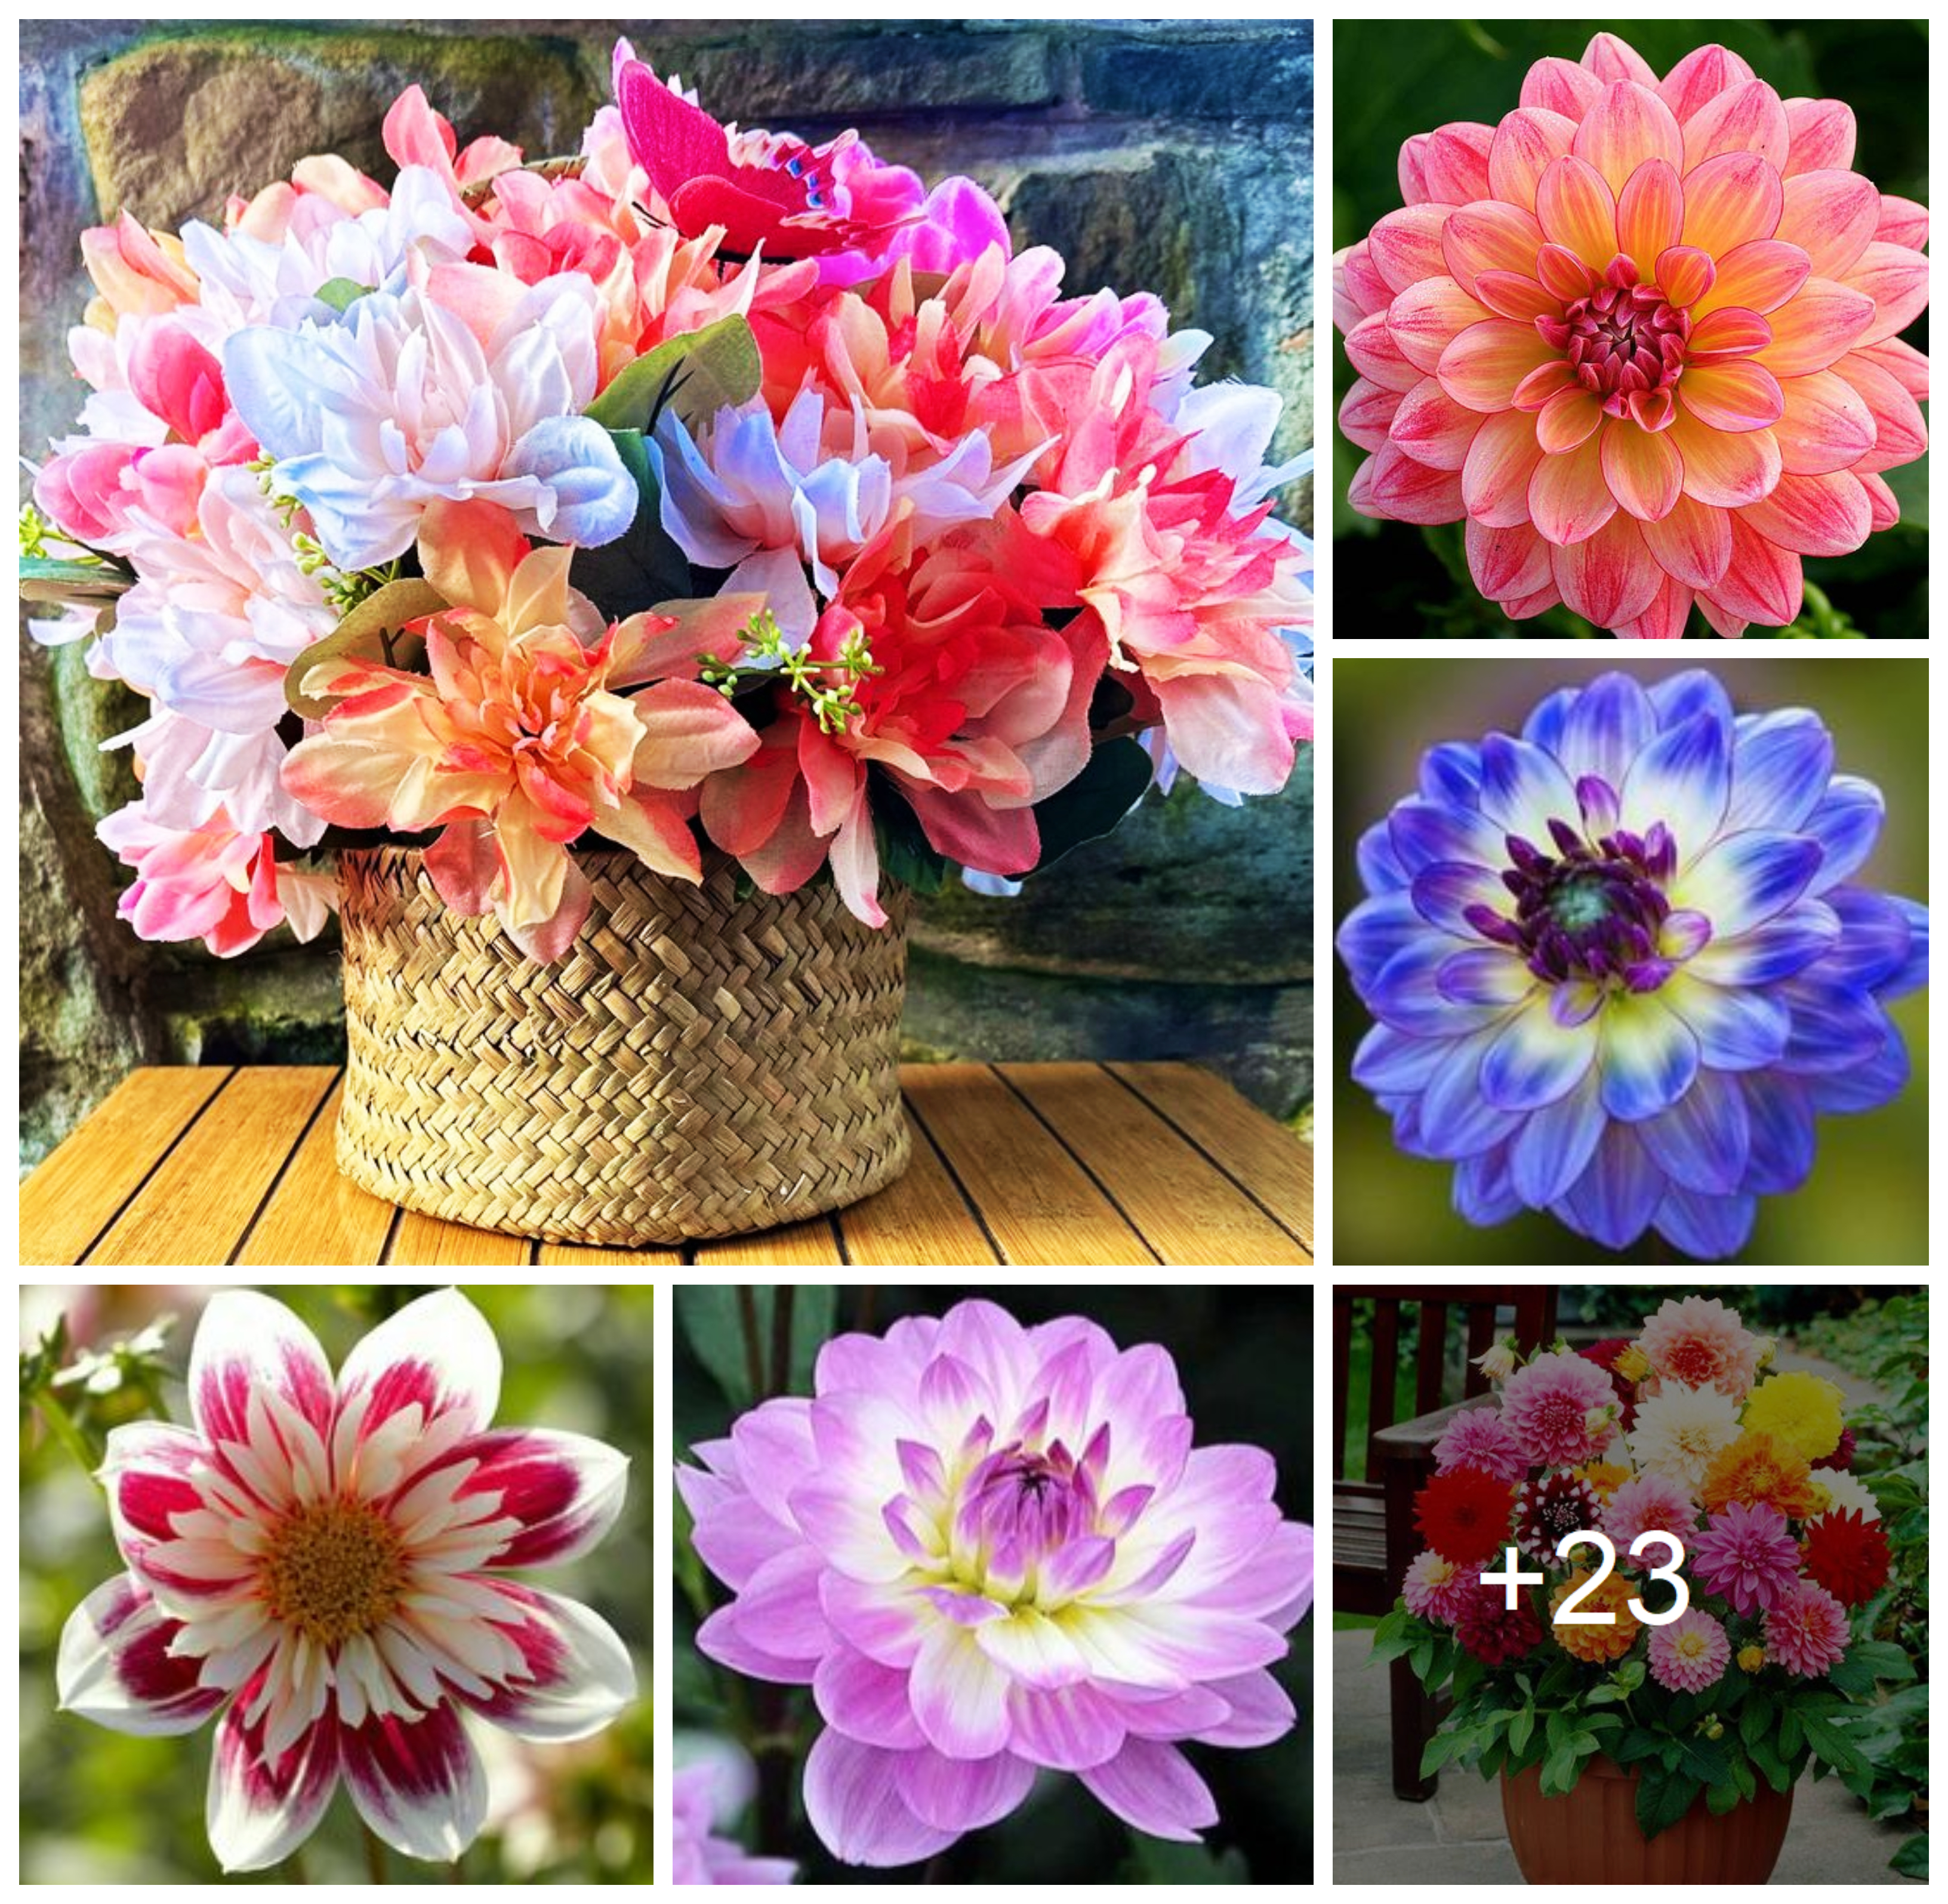 Tips on growing colorful dahlia flowers